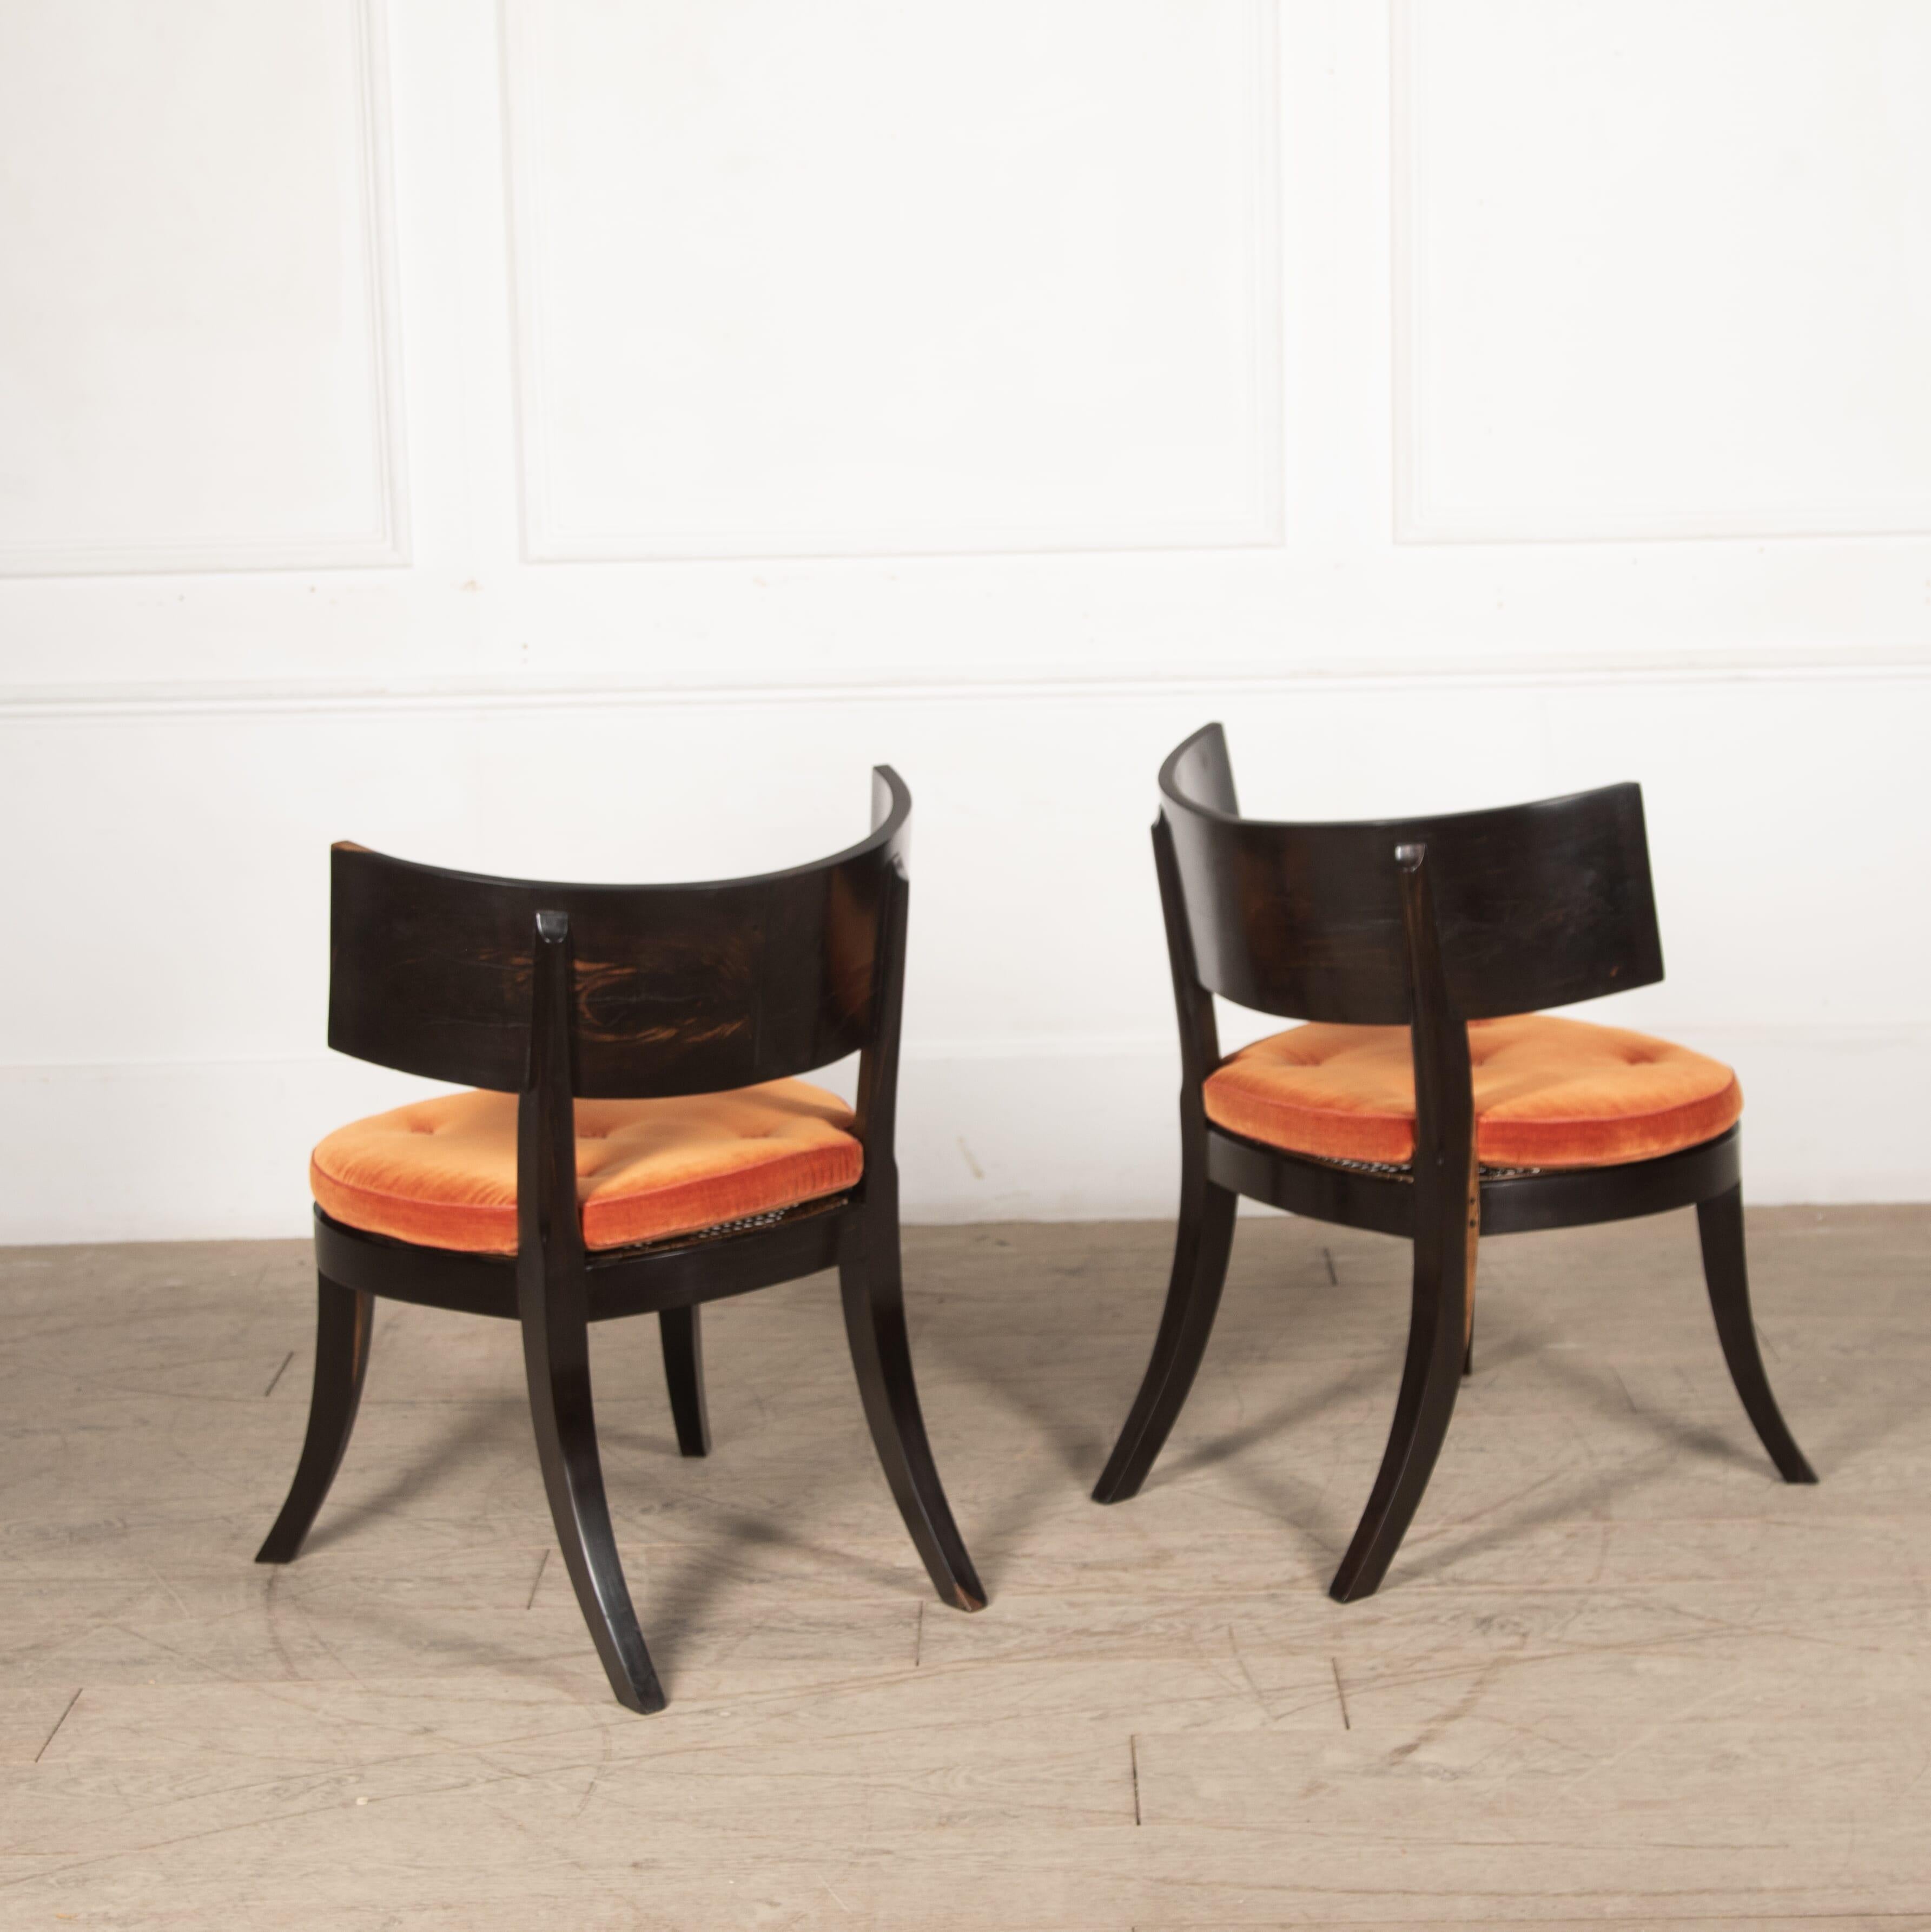 Pair of 1970's Indian solid coromandel klismos side chairs.
With orange/coral cushions on a cane seat, some signs of wear commensurate with age.